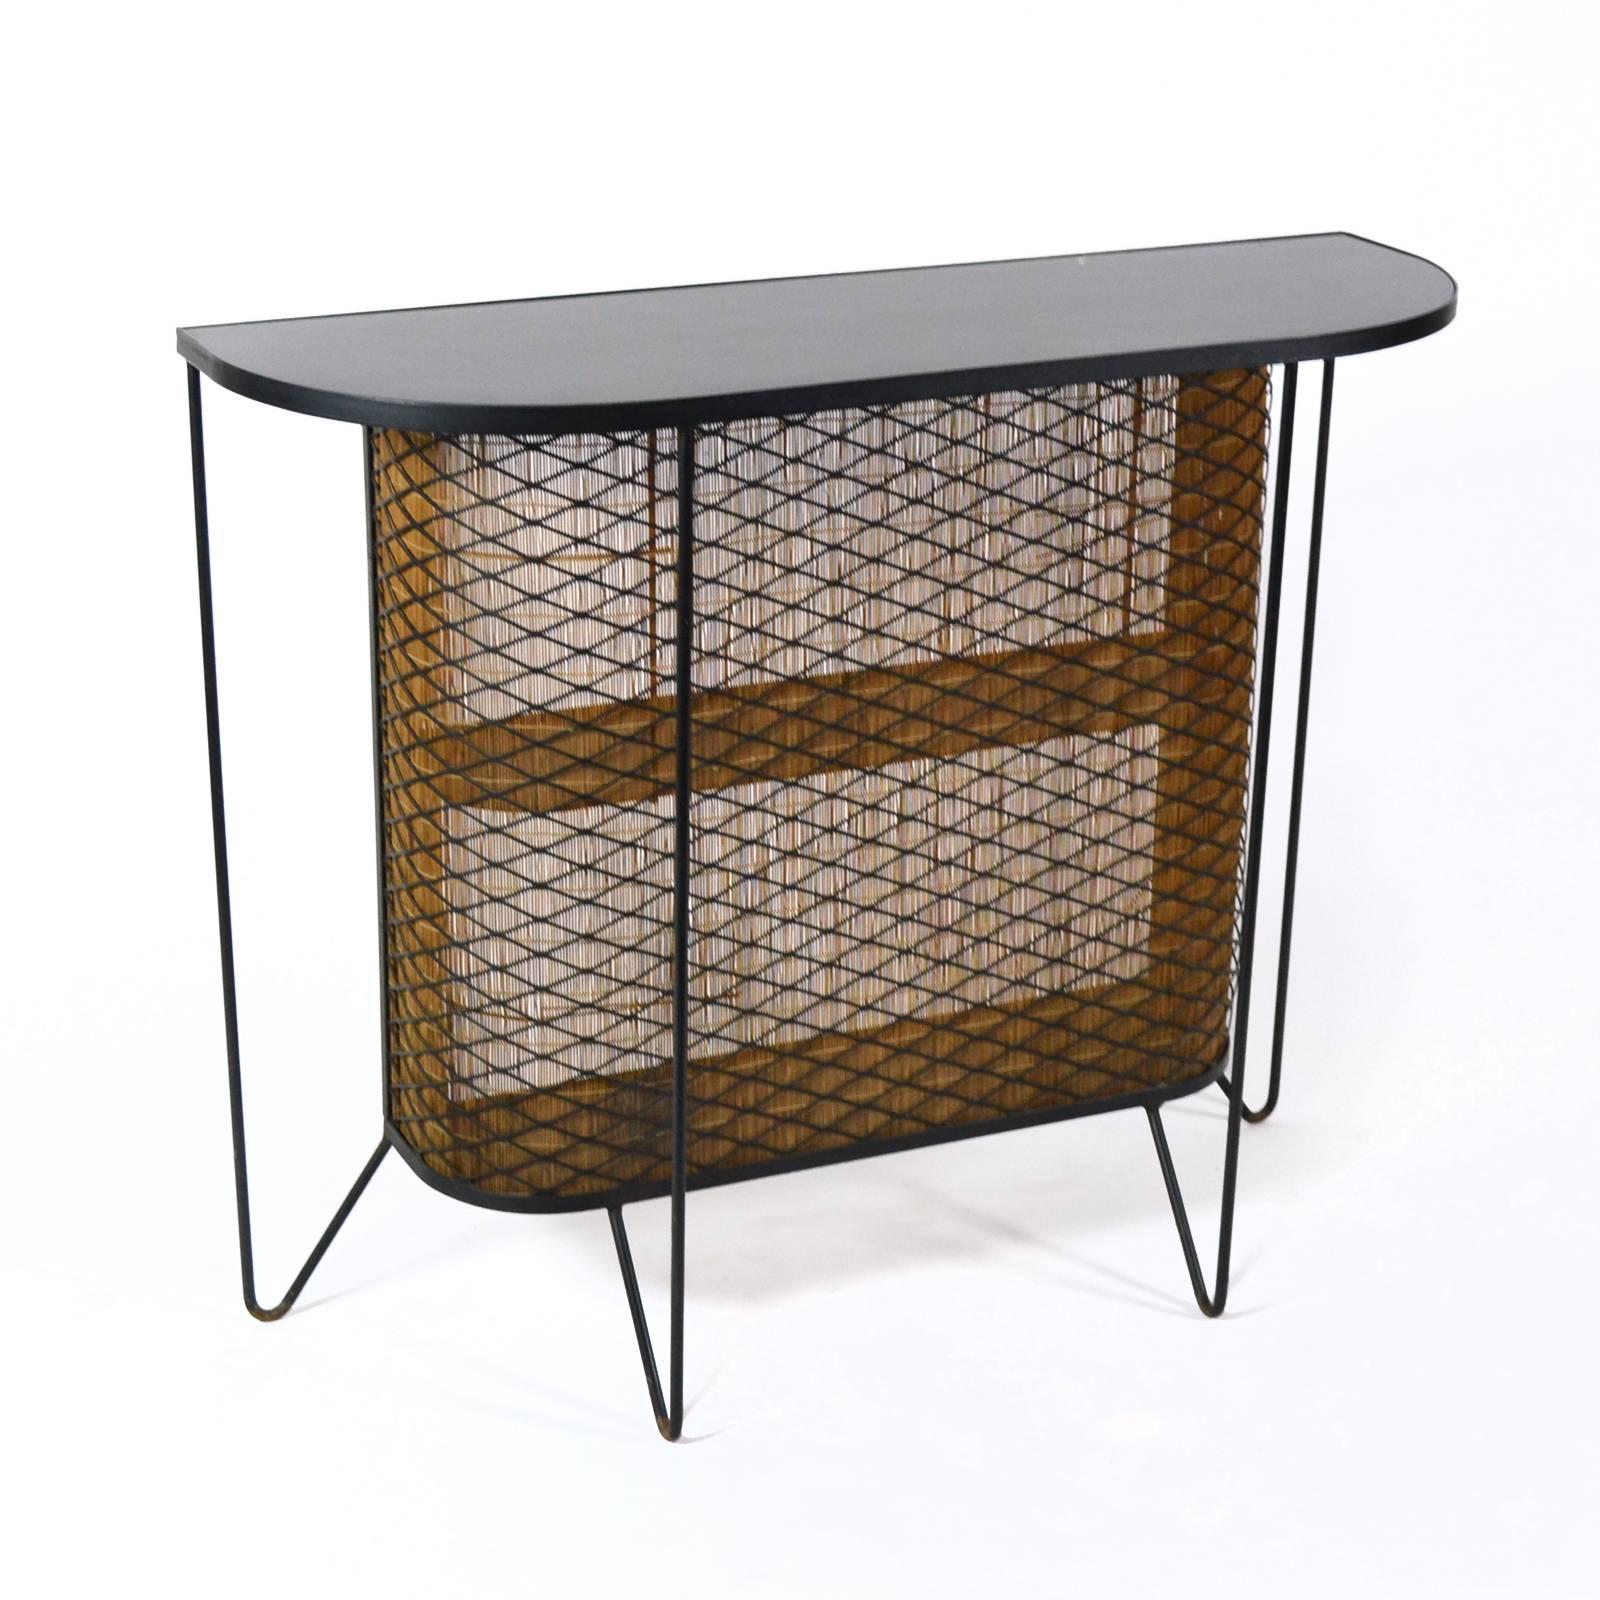 A delightful design which perfectly displays the play aesthetic of American Mid-Century Modern as designers experimented with simple materials like iron rod, expanded metal, and matchstick bamboo. Here, Weinberg used them to great effect, creating a